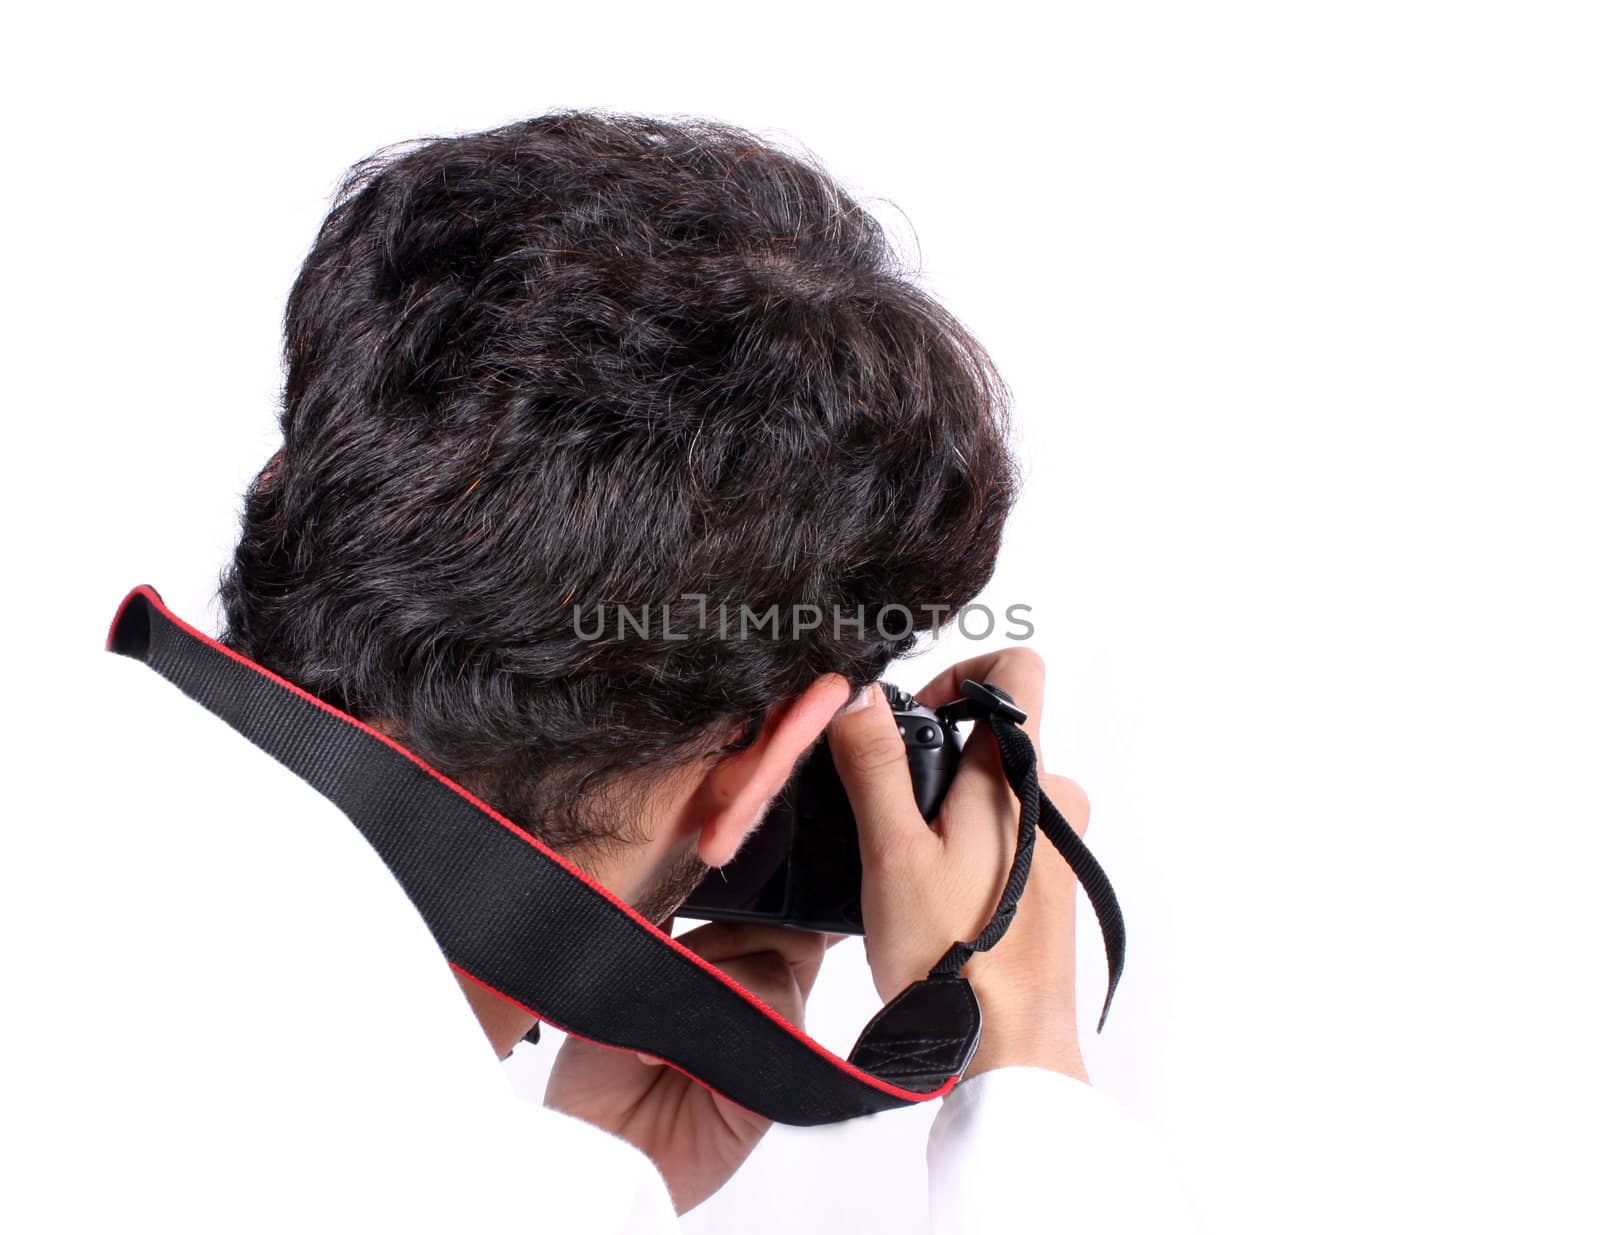 A rear view of a photographer in action, on white studio background.